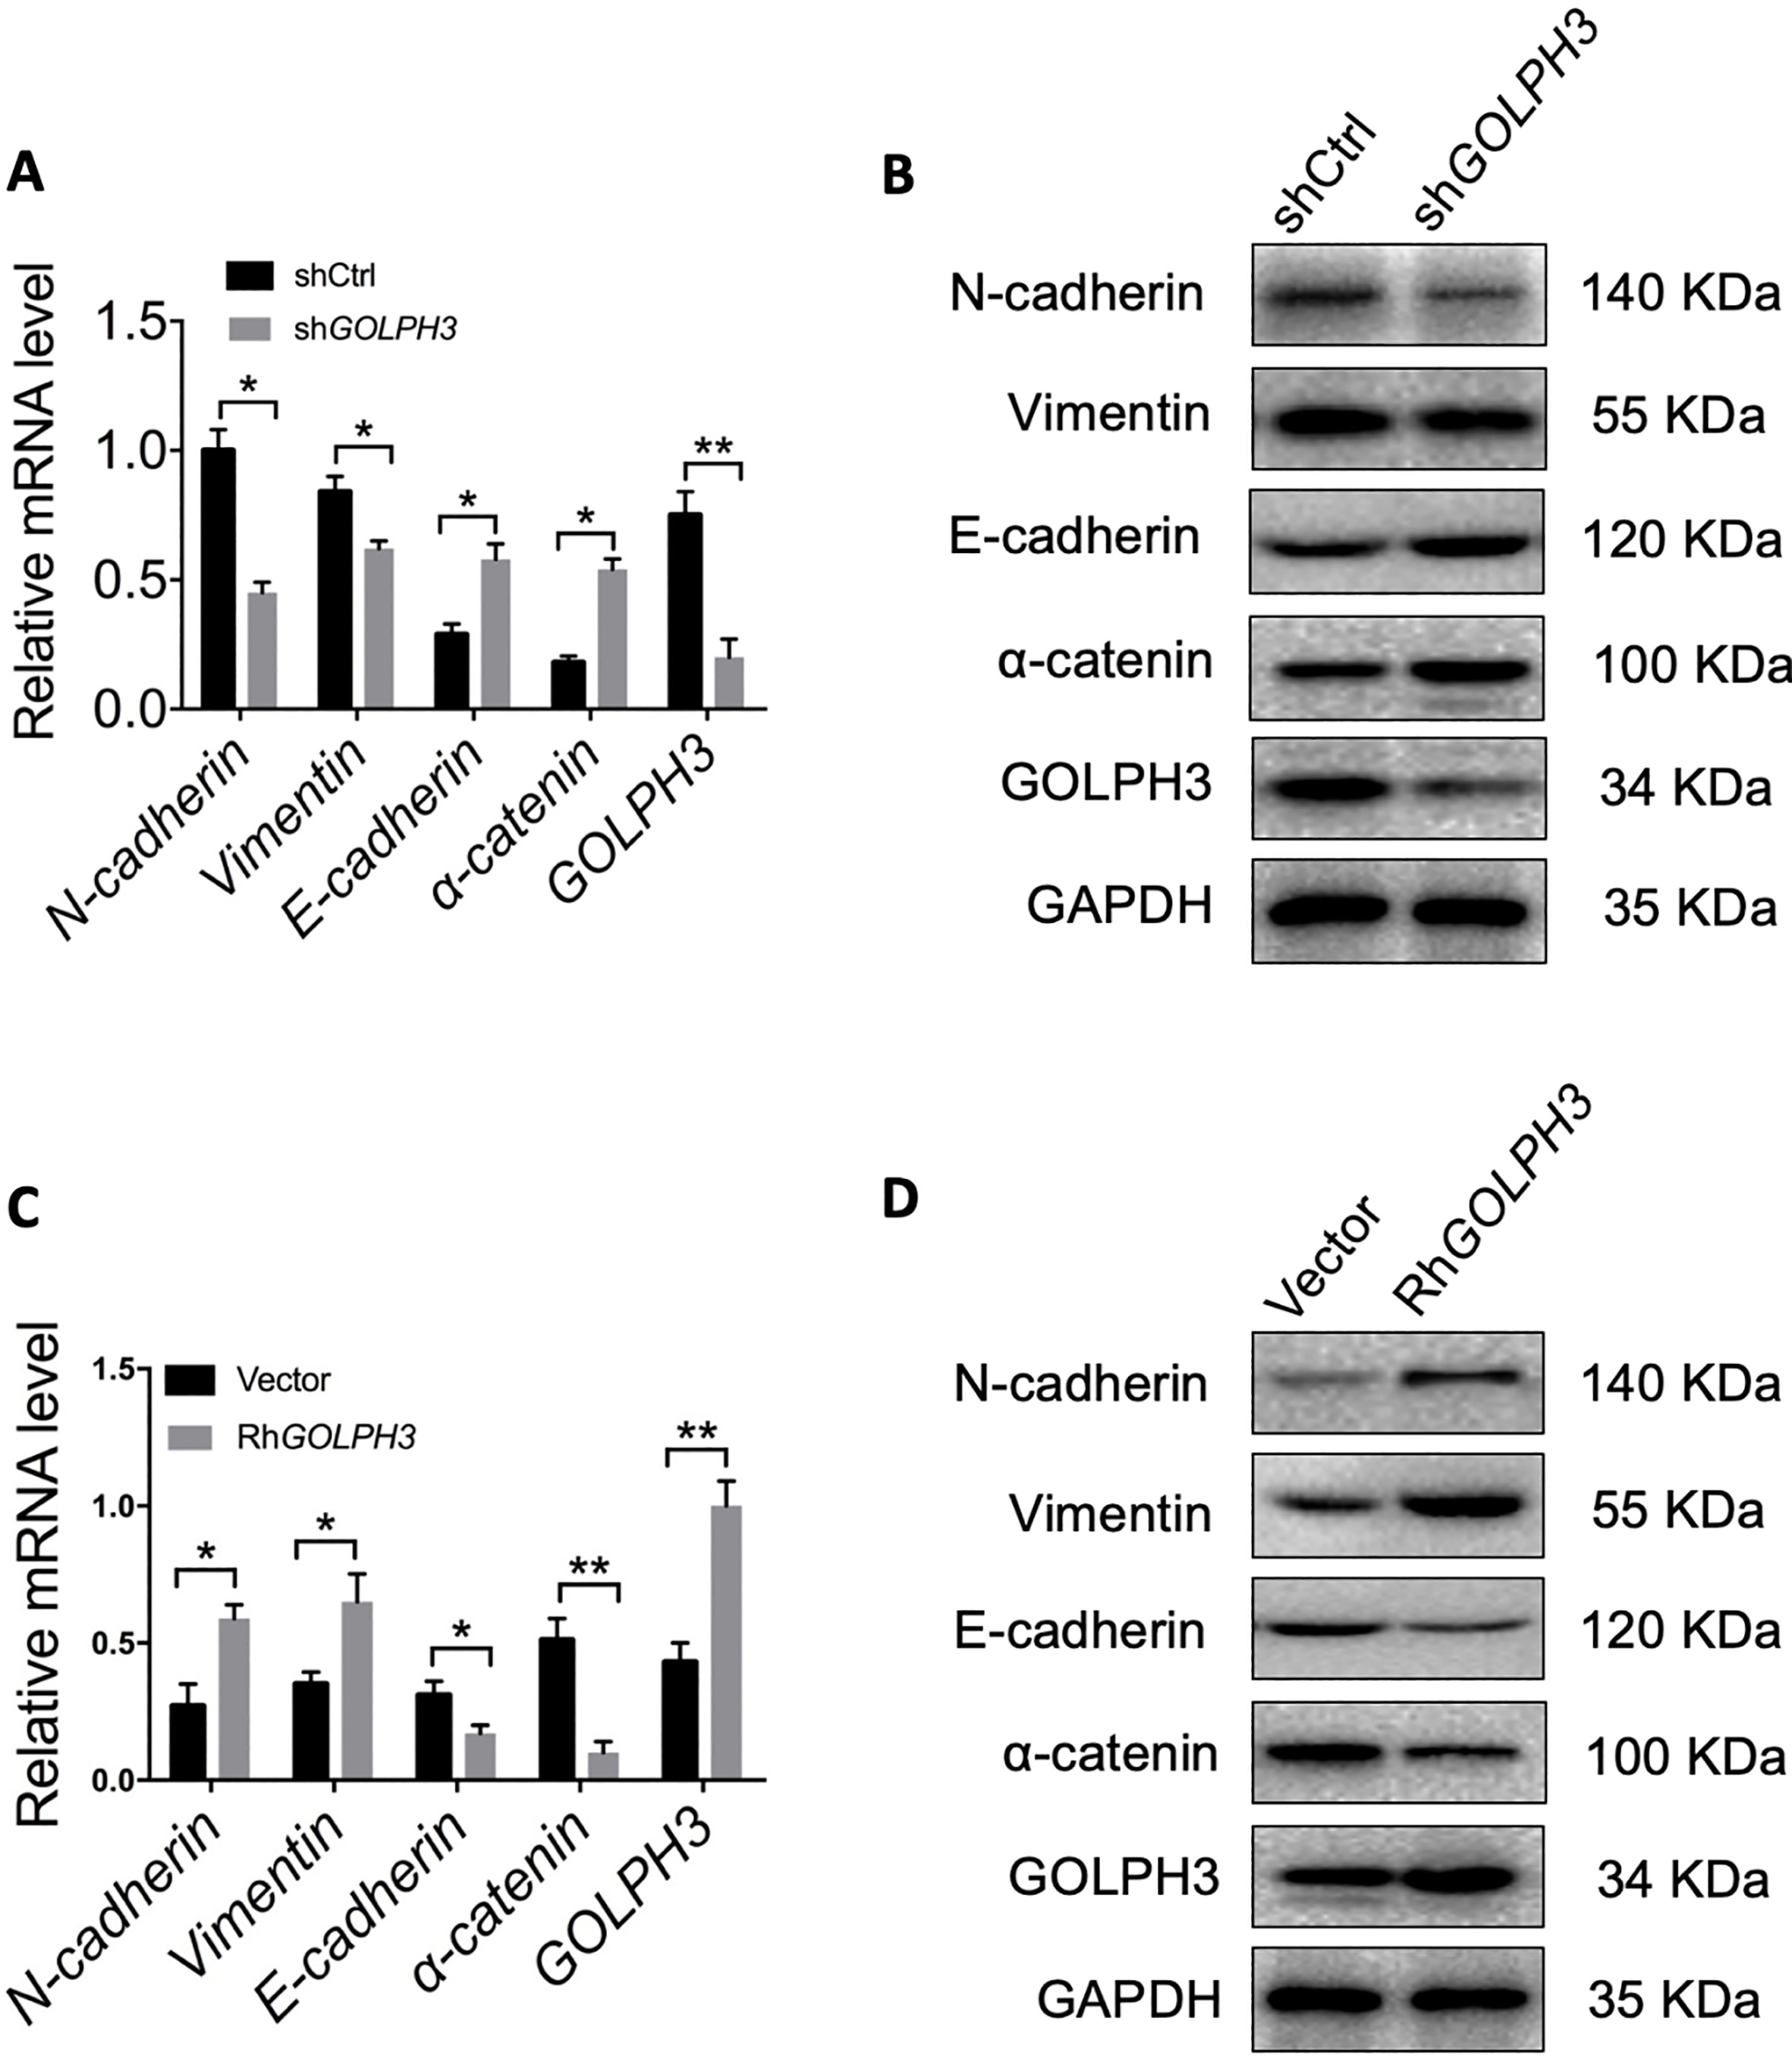 GOLPH3 regulates the transition between epithelial and mesenchymal phenotypes in EC cells. (A–B) Expression levels of epithelial and mesenchymal markers were compared between KLE-shGOLPH3 (knockdown) and control cells by qRT-PCR and western blotting. GOLPH3 knockdown reduced the expression of mesenchymal markers and upregulated epithelial markers (MET). (C–D) Expression levels of epithelial and mesenchymal marker were compared between overexpressing Ishikawa-RhGOLPH3 and control cells by qRT-PCR and western blotting. Ectopic overexpression of GOLPH3 upregulated mesenchymal marker expression and downregulated epithelial marker expression. All values are the mean ± SD of three independent experiments. P*< 0.05, P**< 0.01.